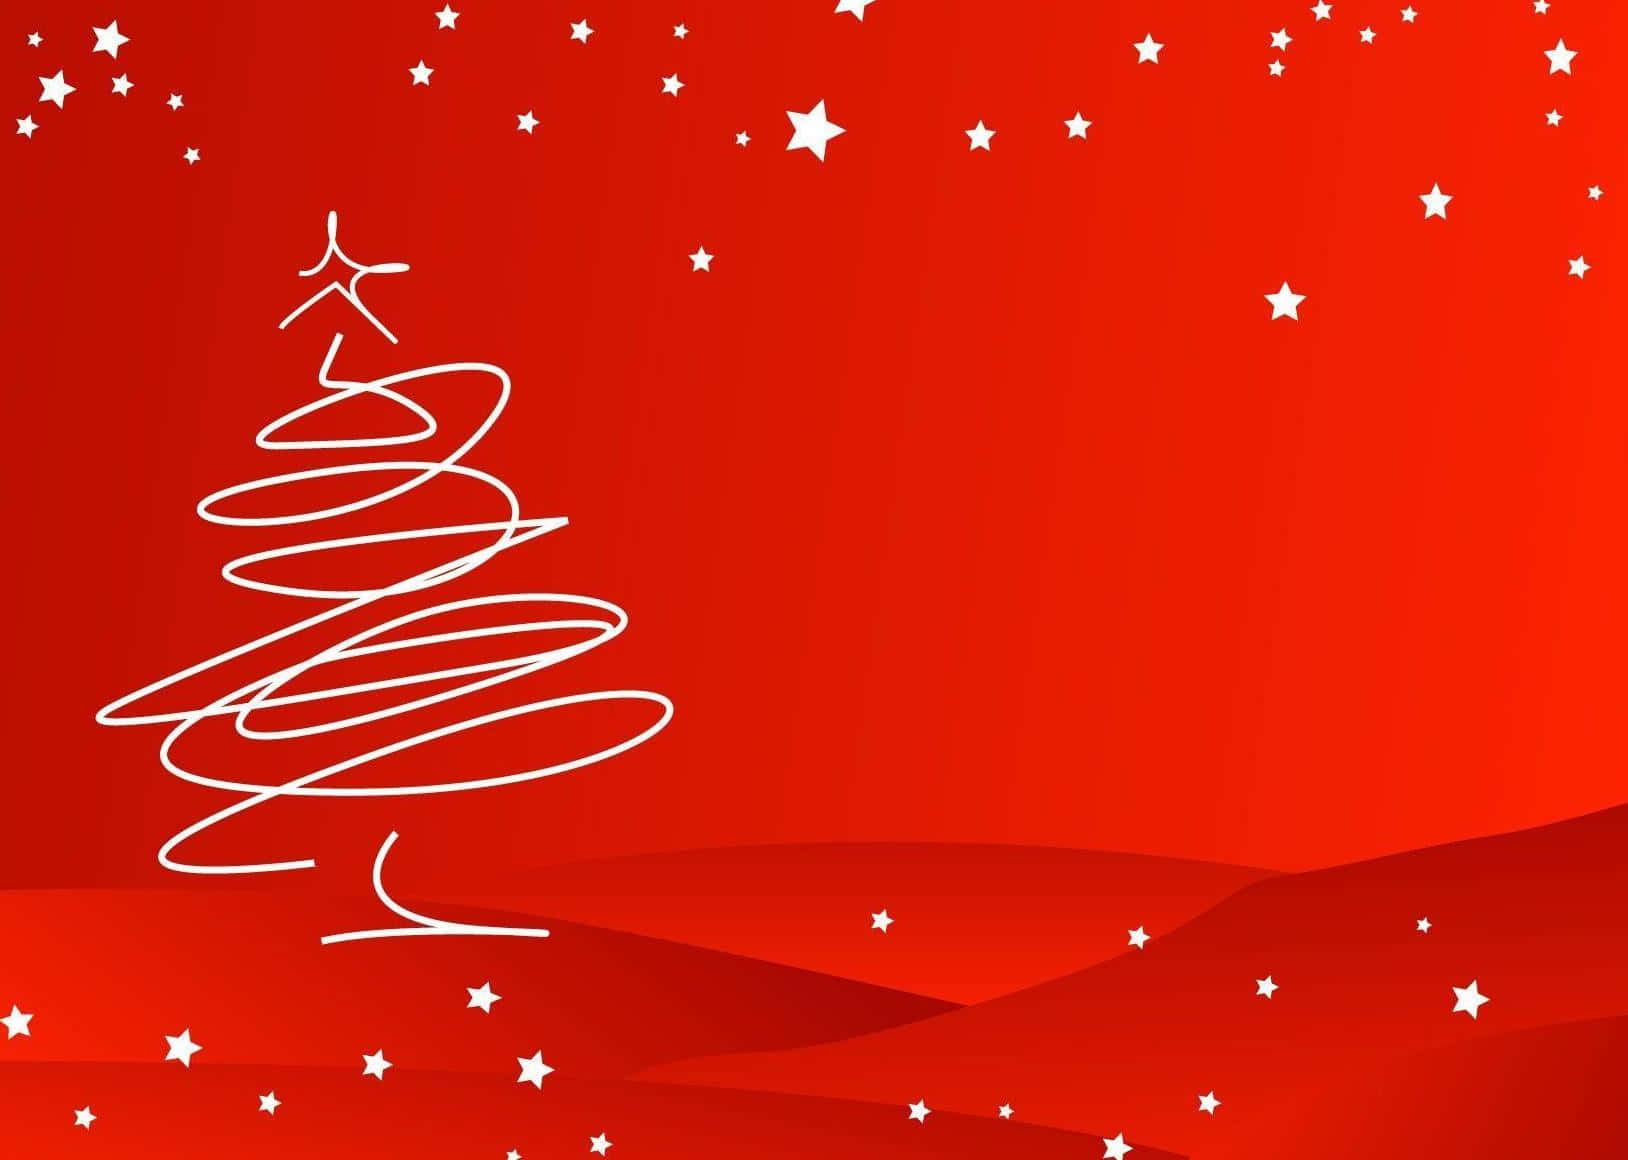 Christmas Tree On Red Background With Stars